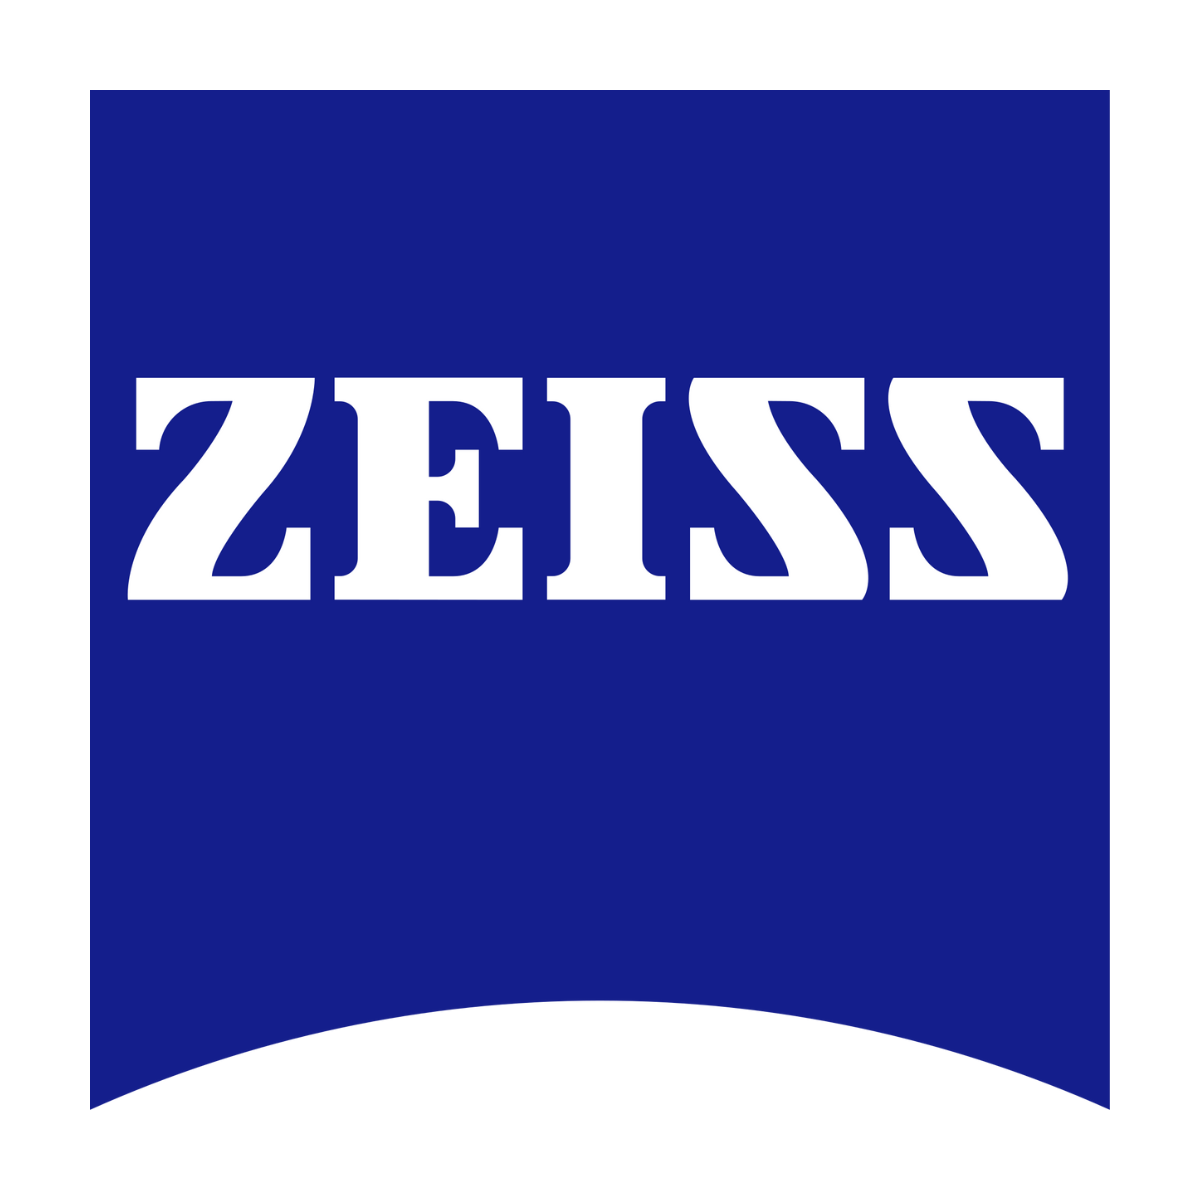 "Zeiss Eyewear at Optorium: Shop now for free shipping and cash on delivery."